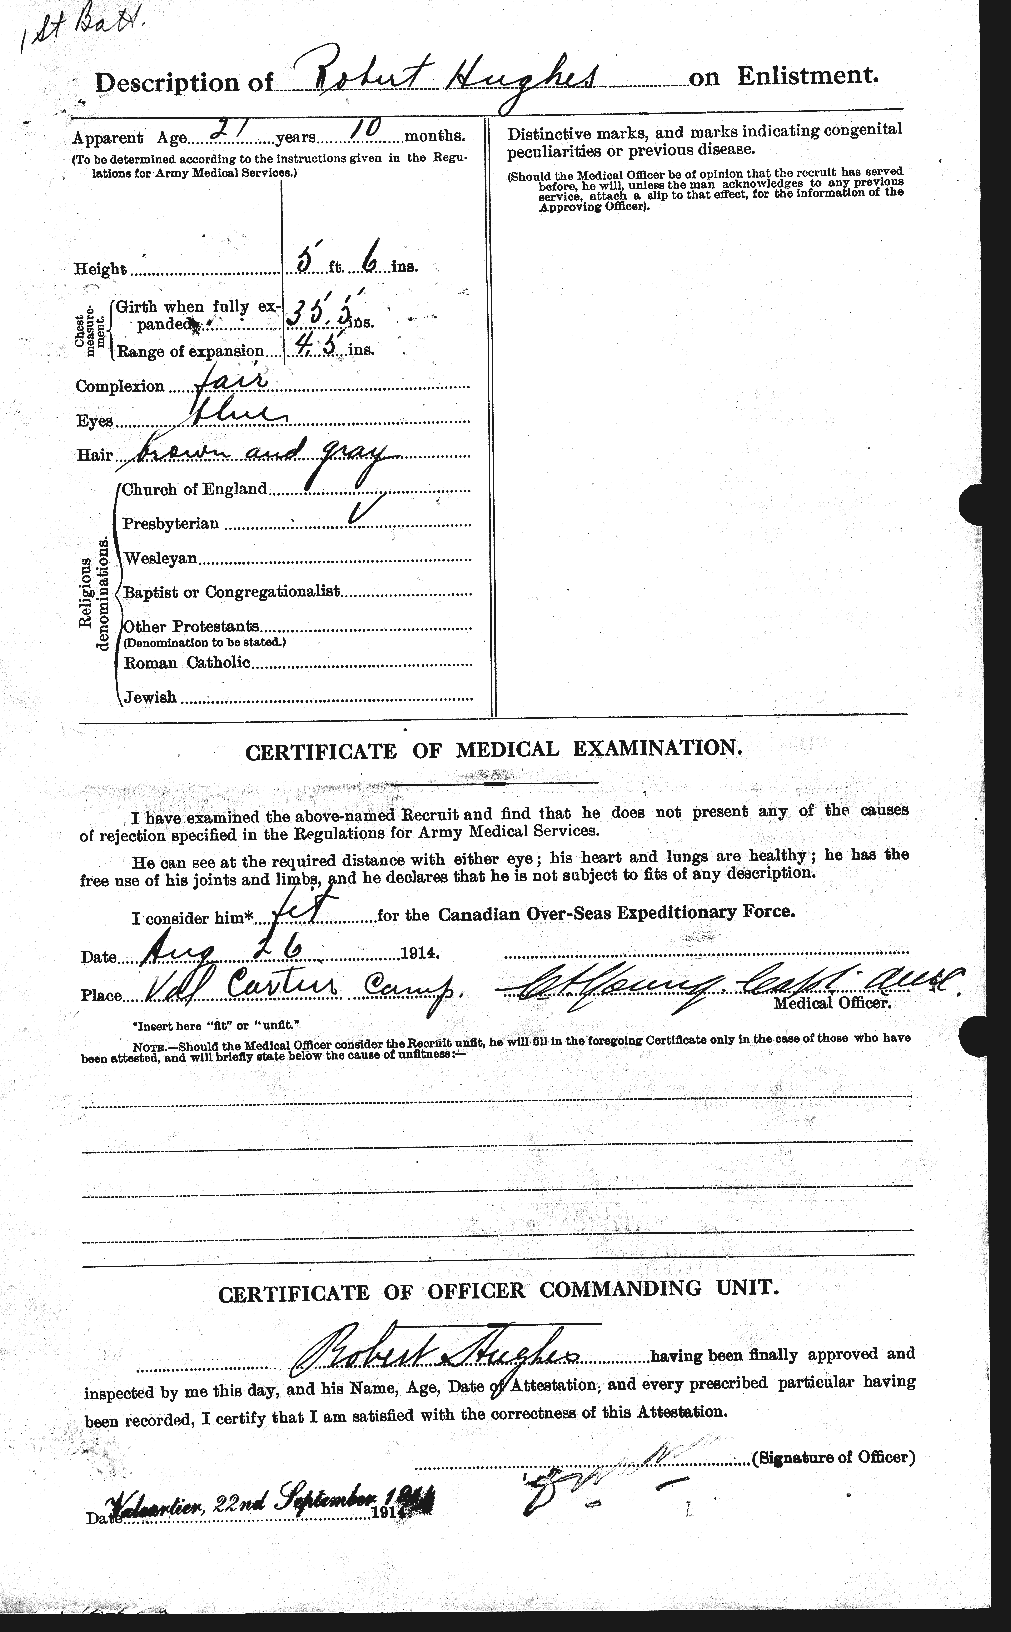 Personnel Records of the First World War - CEF 406605b